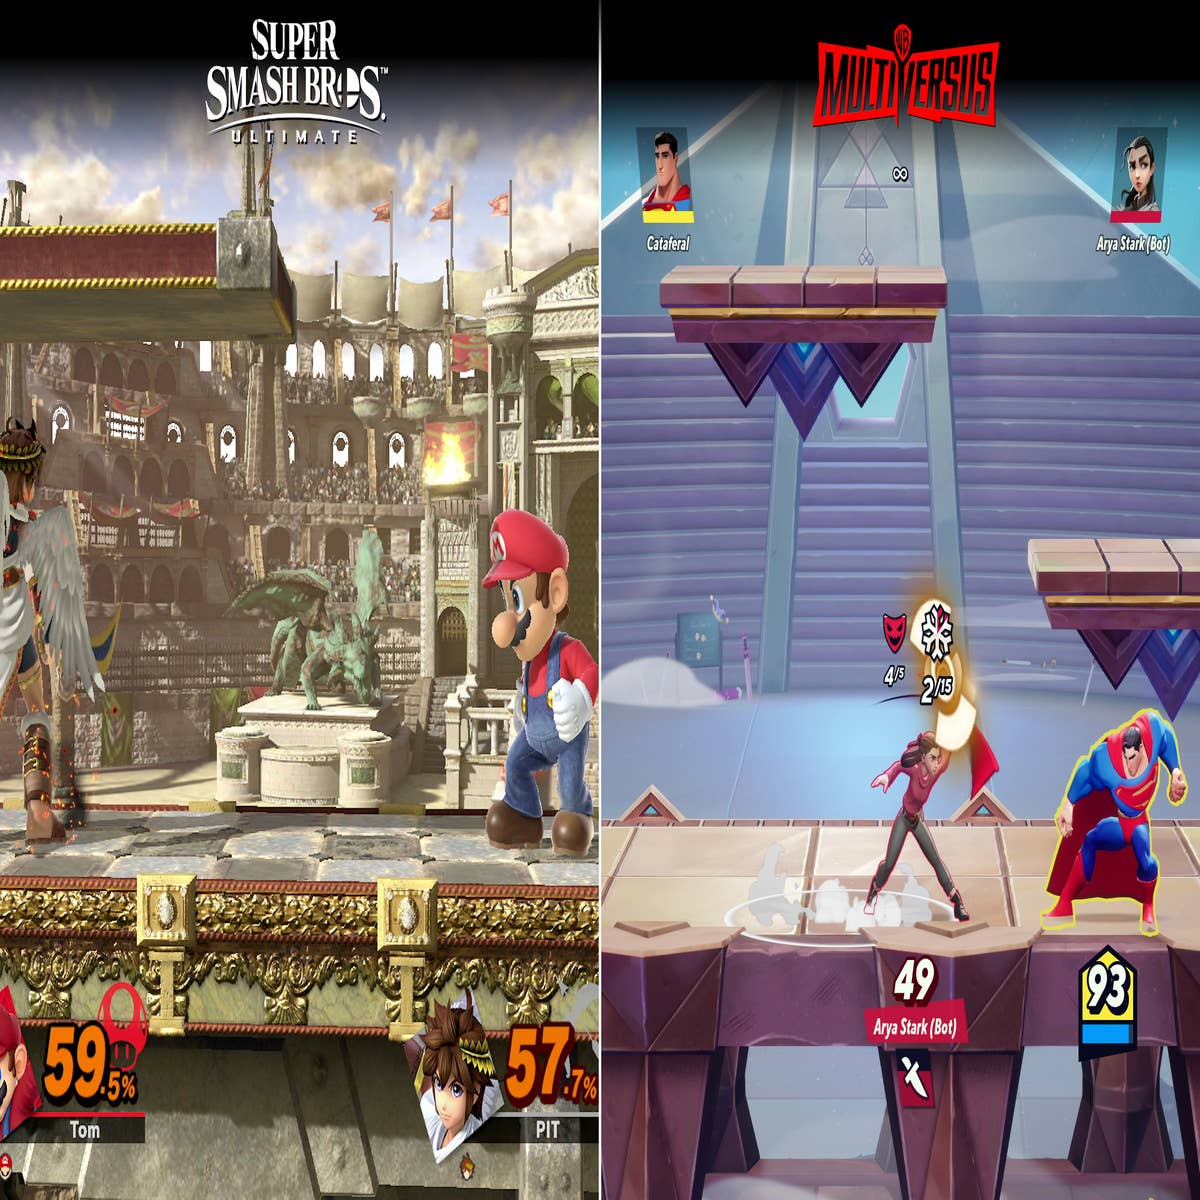 Is MultiVersus Worth Playing? Game Has Solid Lineup of Fighters - Bloomberg